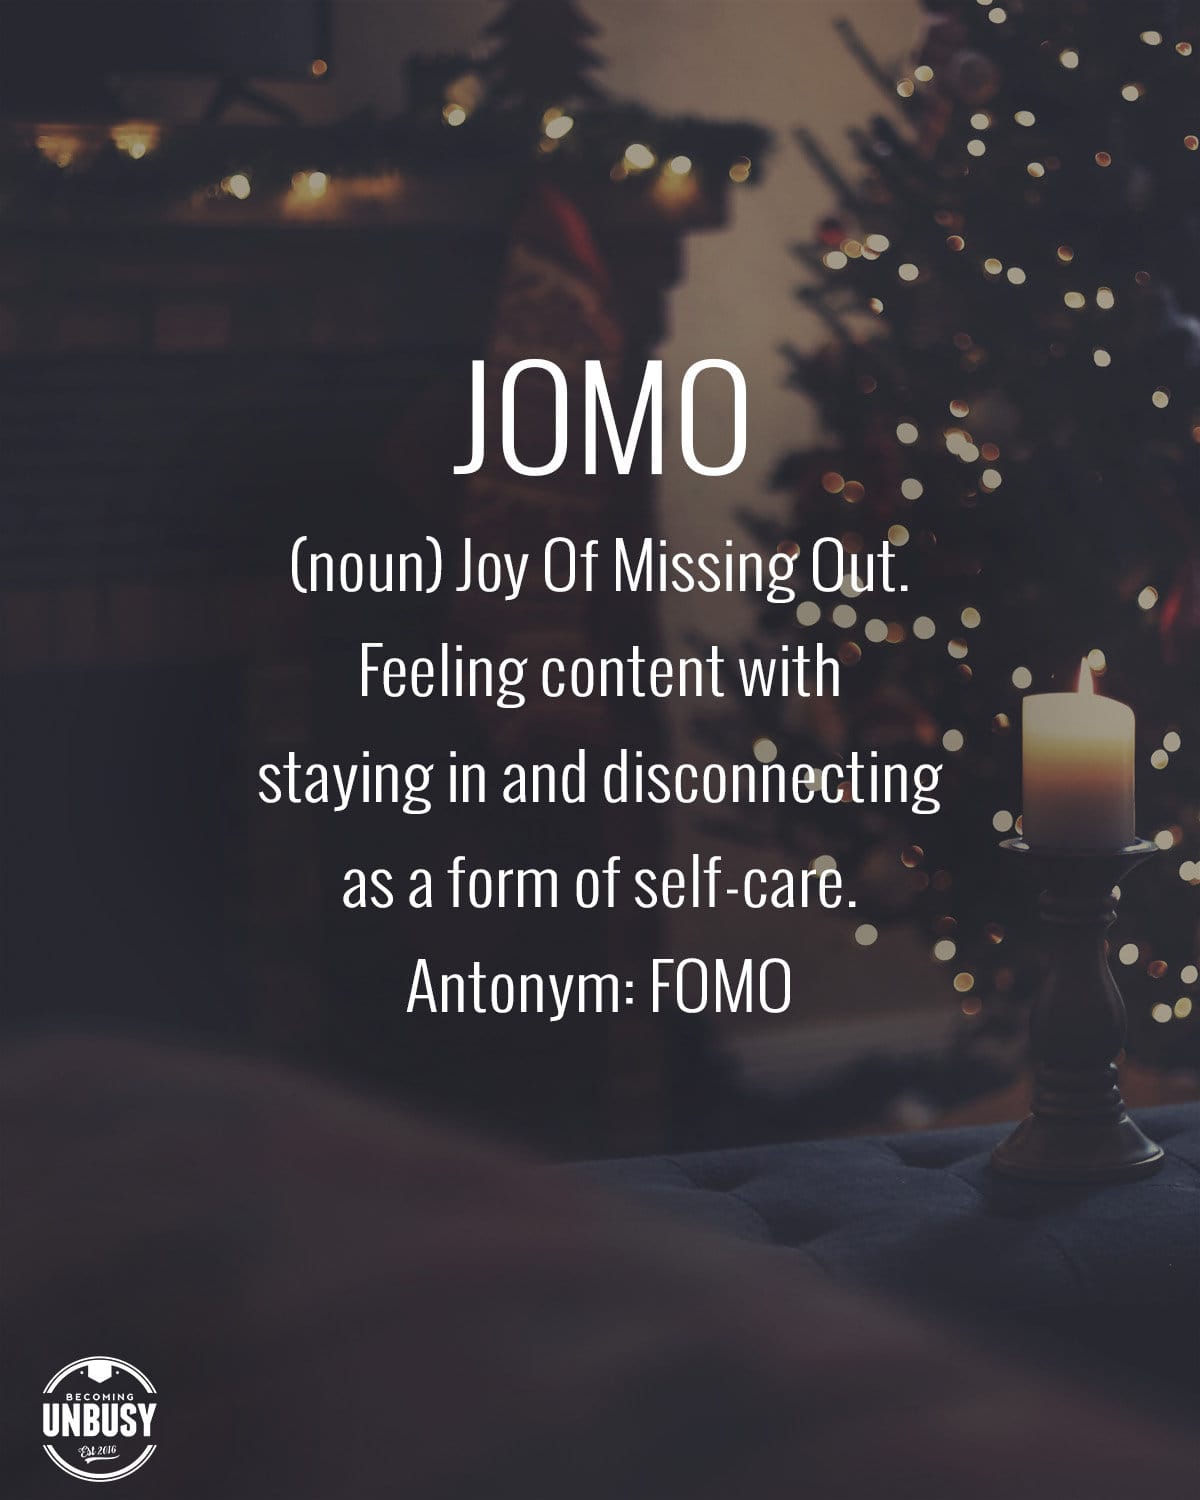 A quiet holiday scene with Christmas lights and the following text overtop... Holiday JOMO — (noun) Joy Of Missing Out. Feeling content with staying in and disconnecting as a form of self-care. Antonym: FOMO